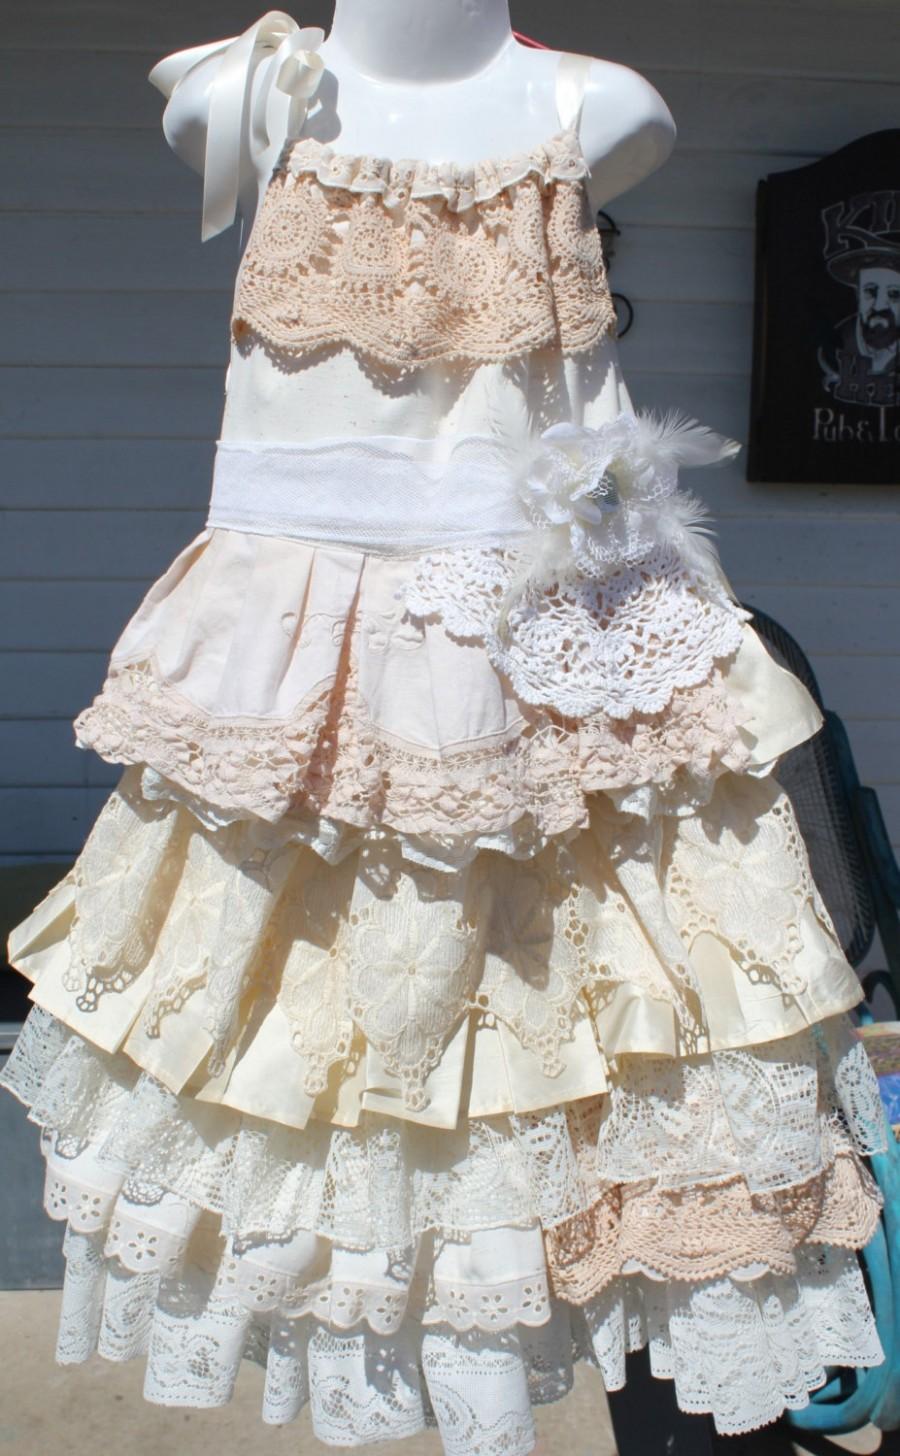 Hochzeit - boho, rustic,wedding, flower girl dress, size 5, 6 and 7, vintage layers ruffles,ribbon tie shoulders,cream, ivory, silk,lace,cotton,calico